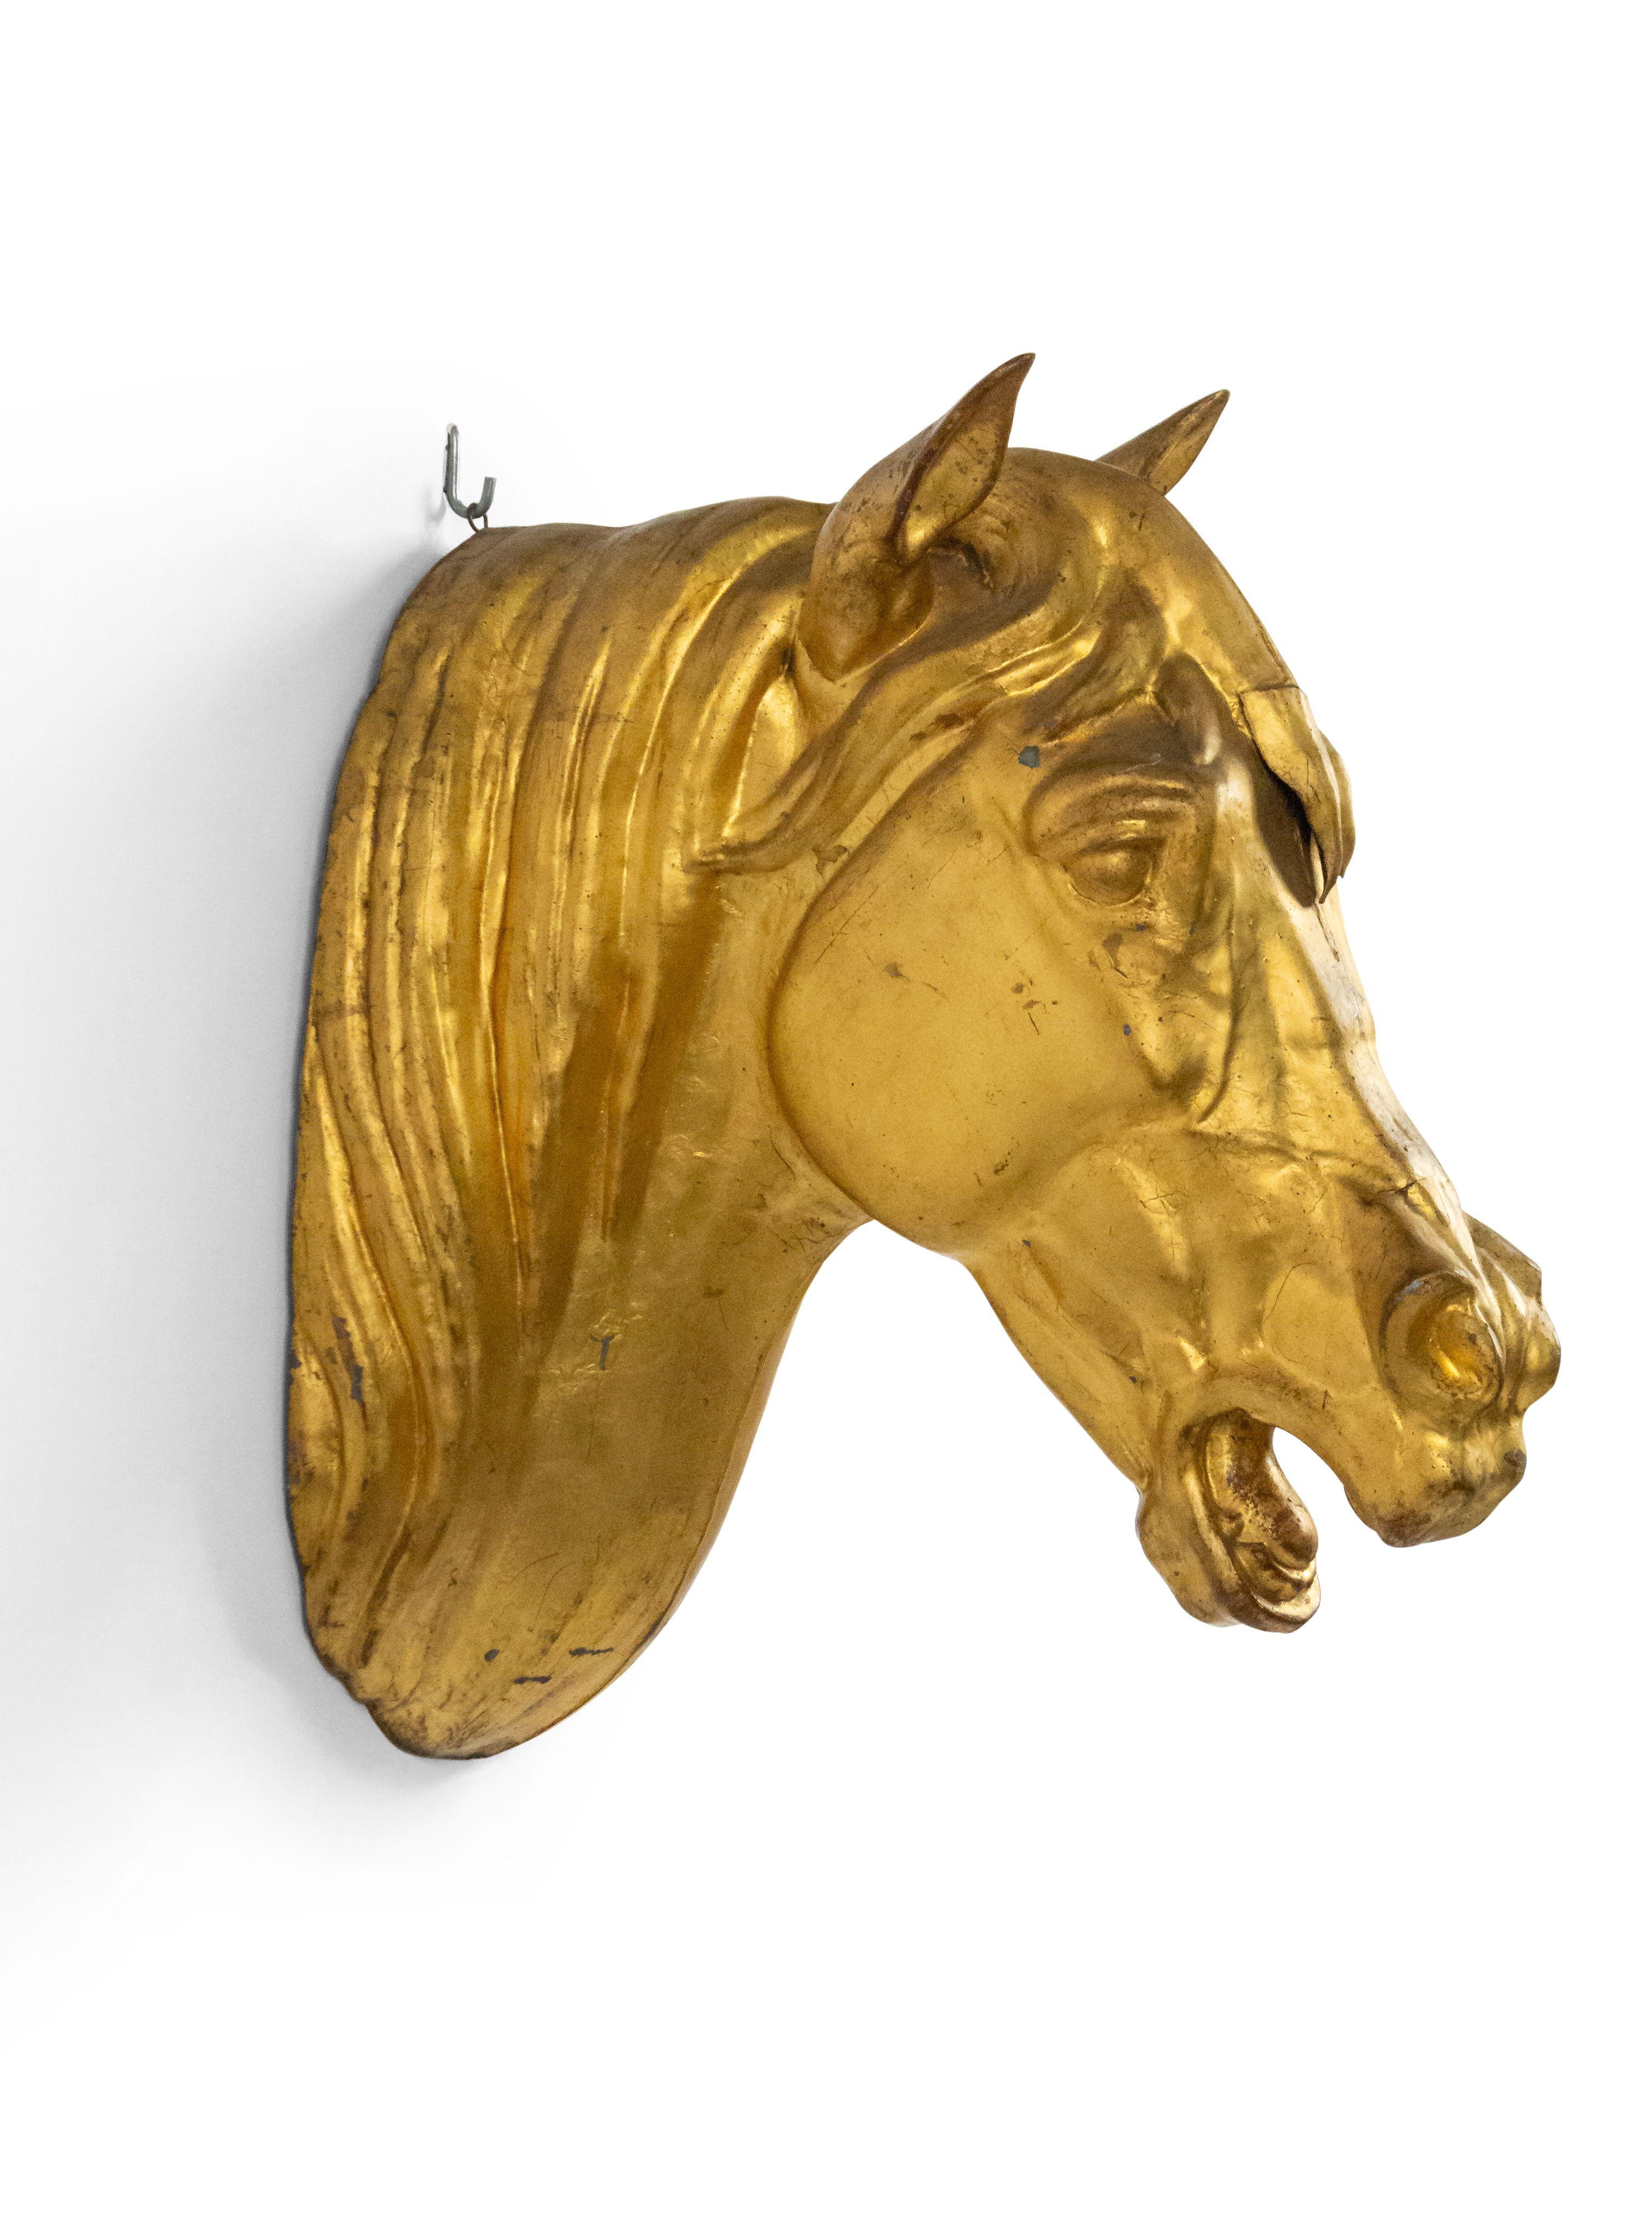 French Provincial (20th Century) wall plaque of gilt horse head butcher sign.
